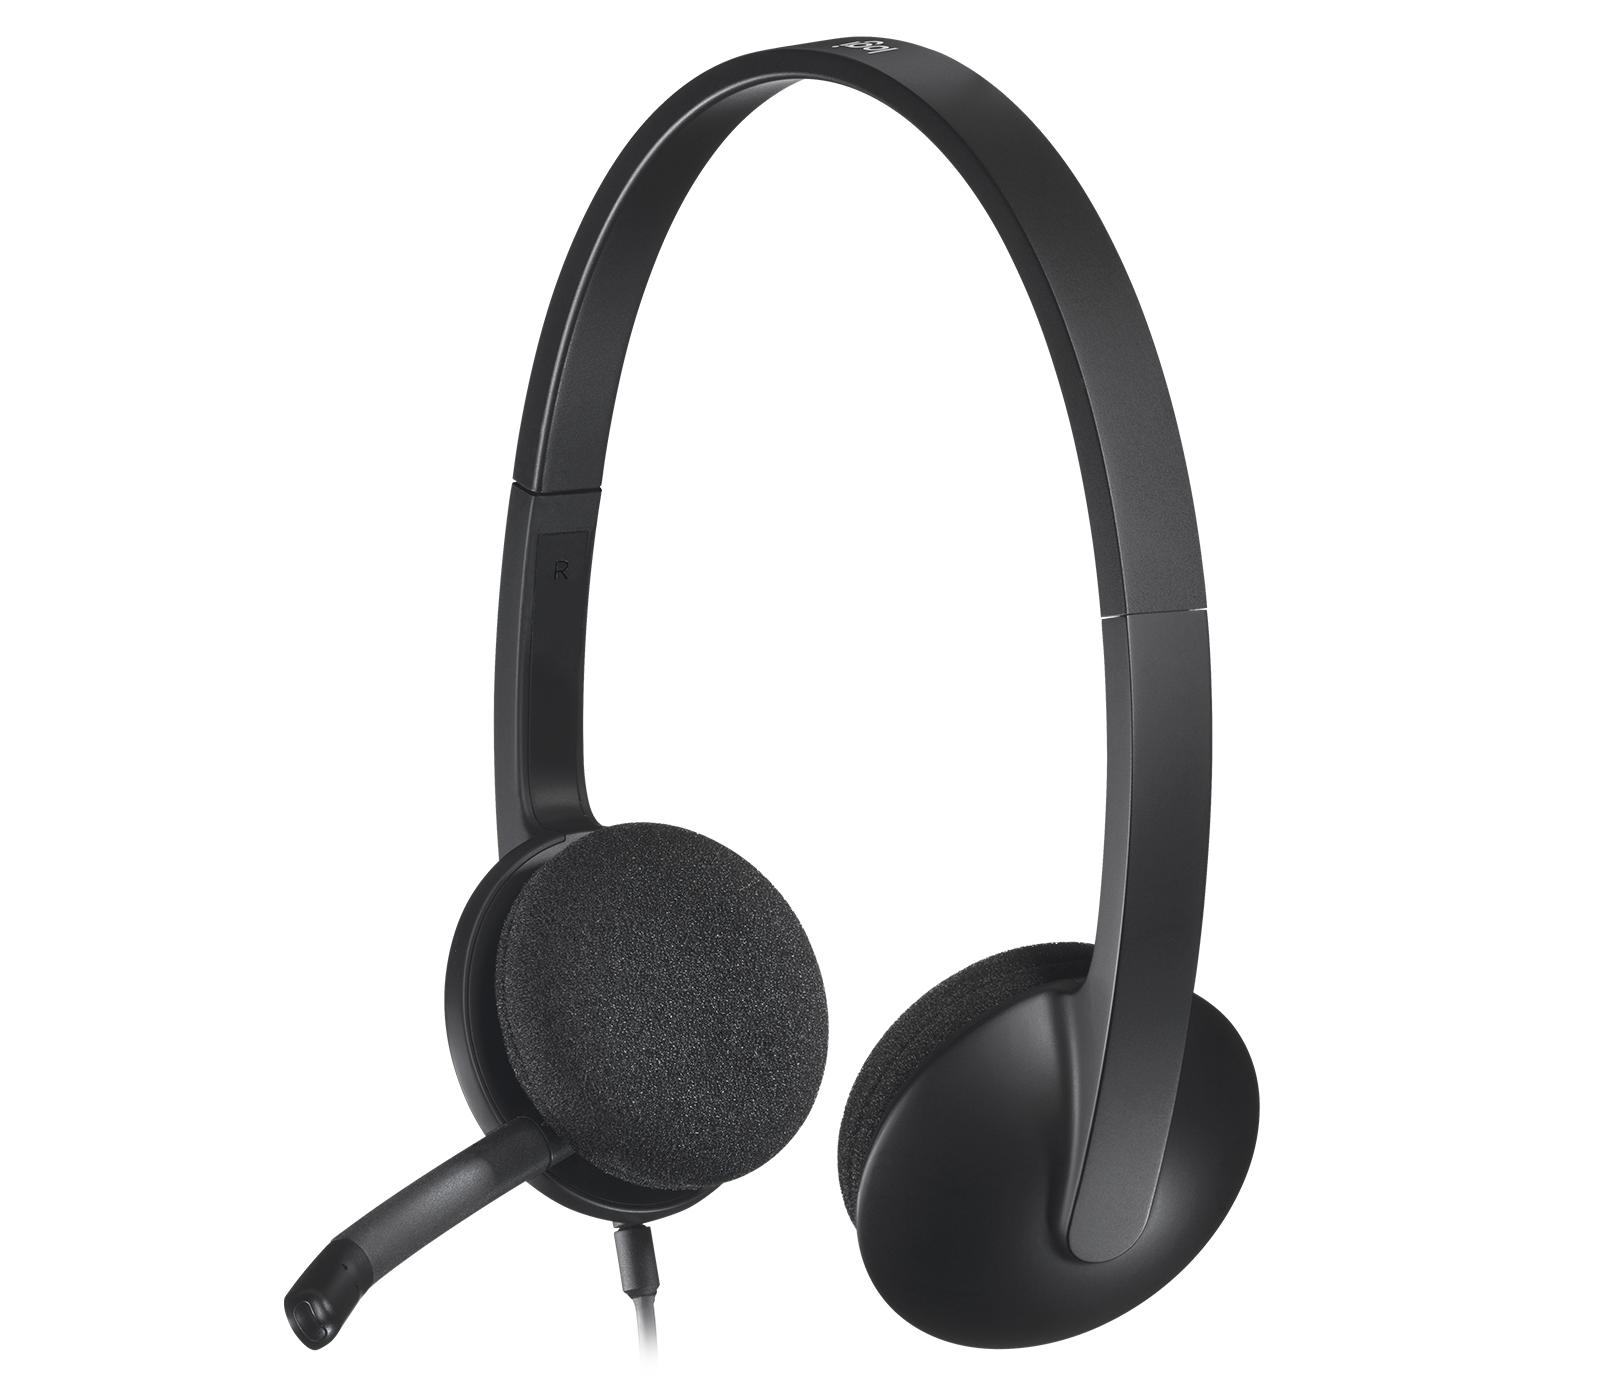 Absoluut Dom overal Logitech H340 USB PC Headset with Noise-Cancelling Mic